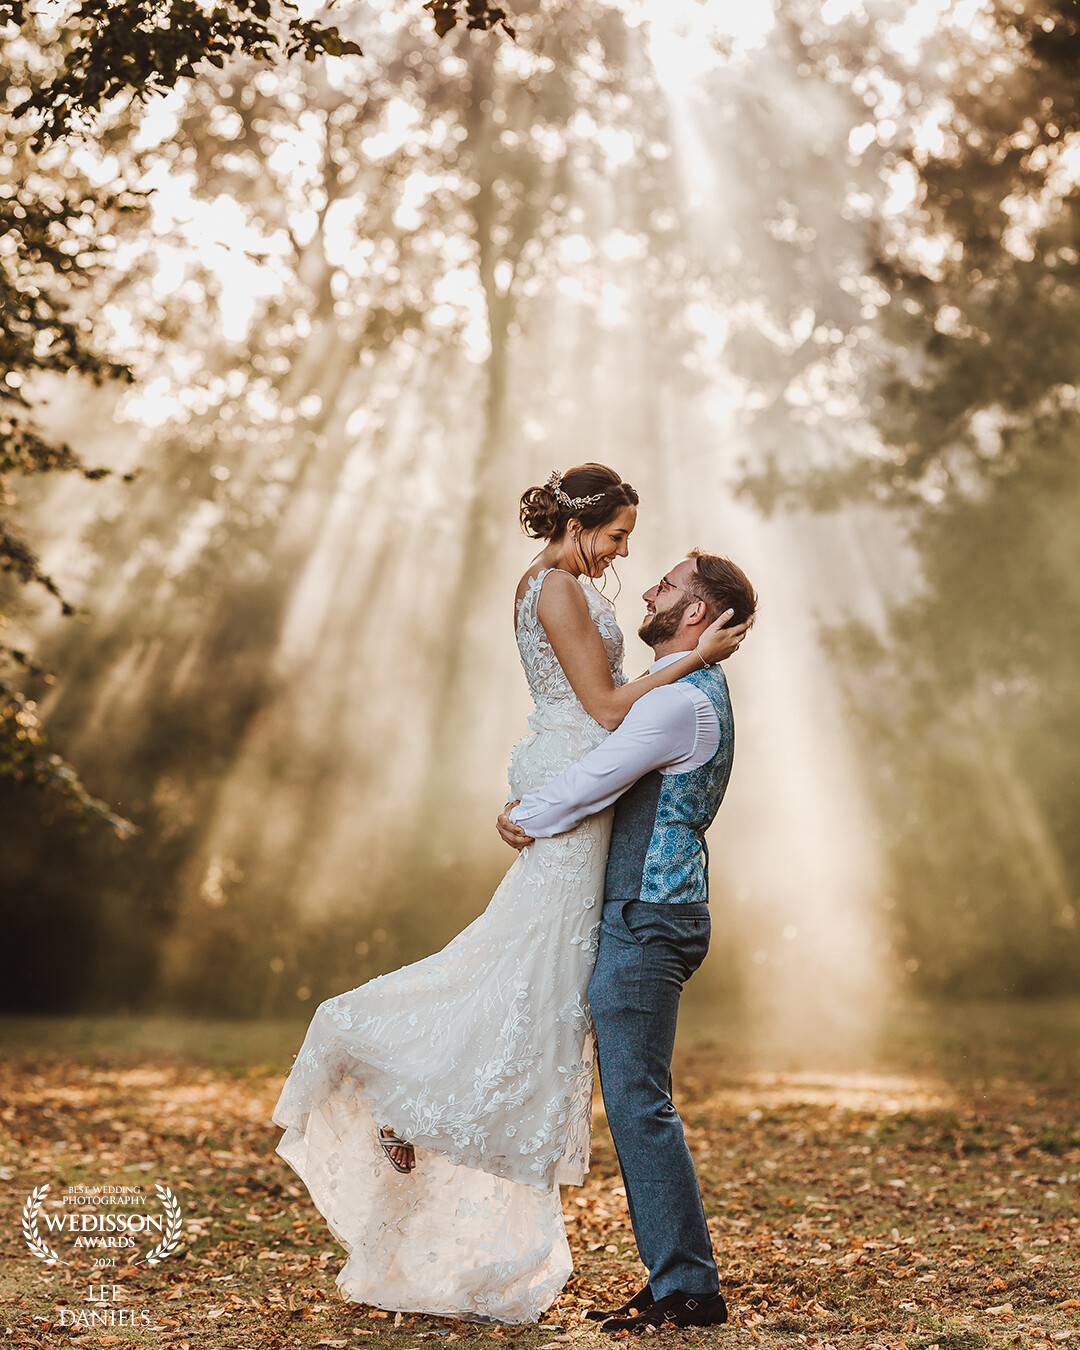 I had the perfect recipe to work with, its one of those images where everything naturally fell into place. I used a smoke bomb to create the atmosphere and let Emma & Dan do the rest